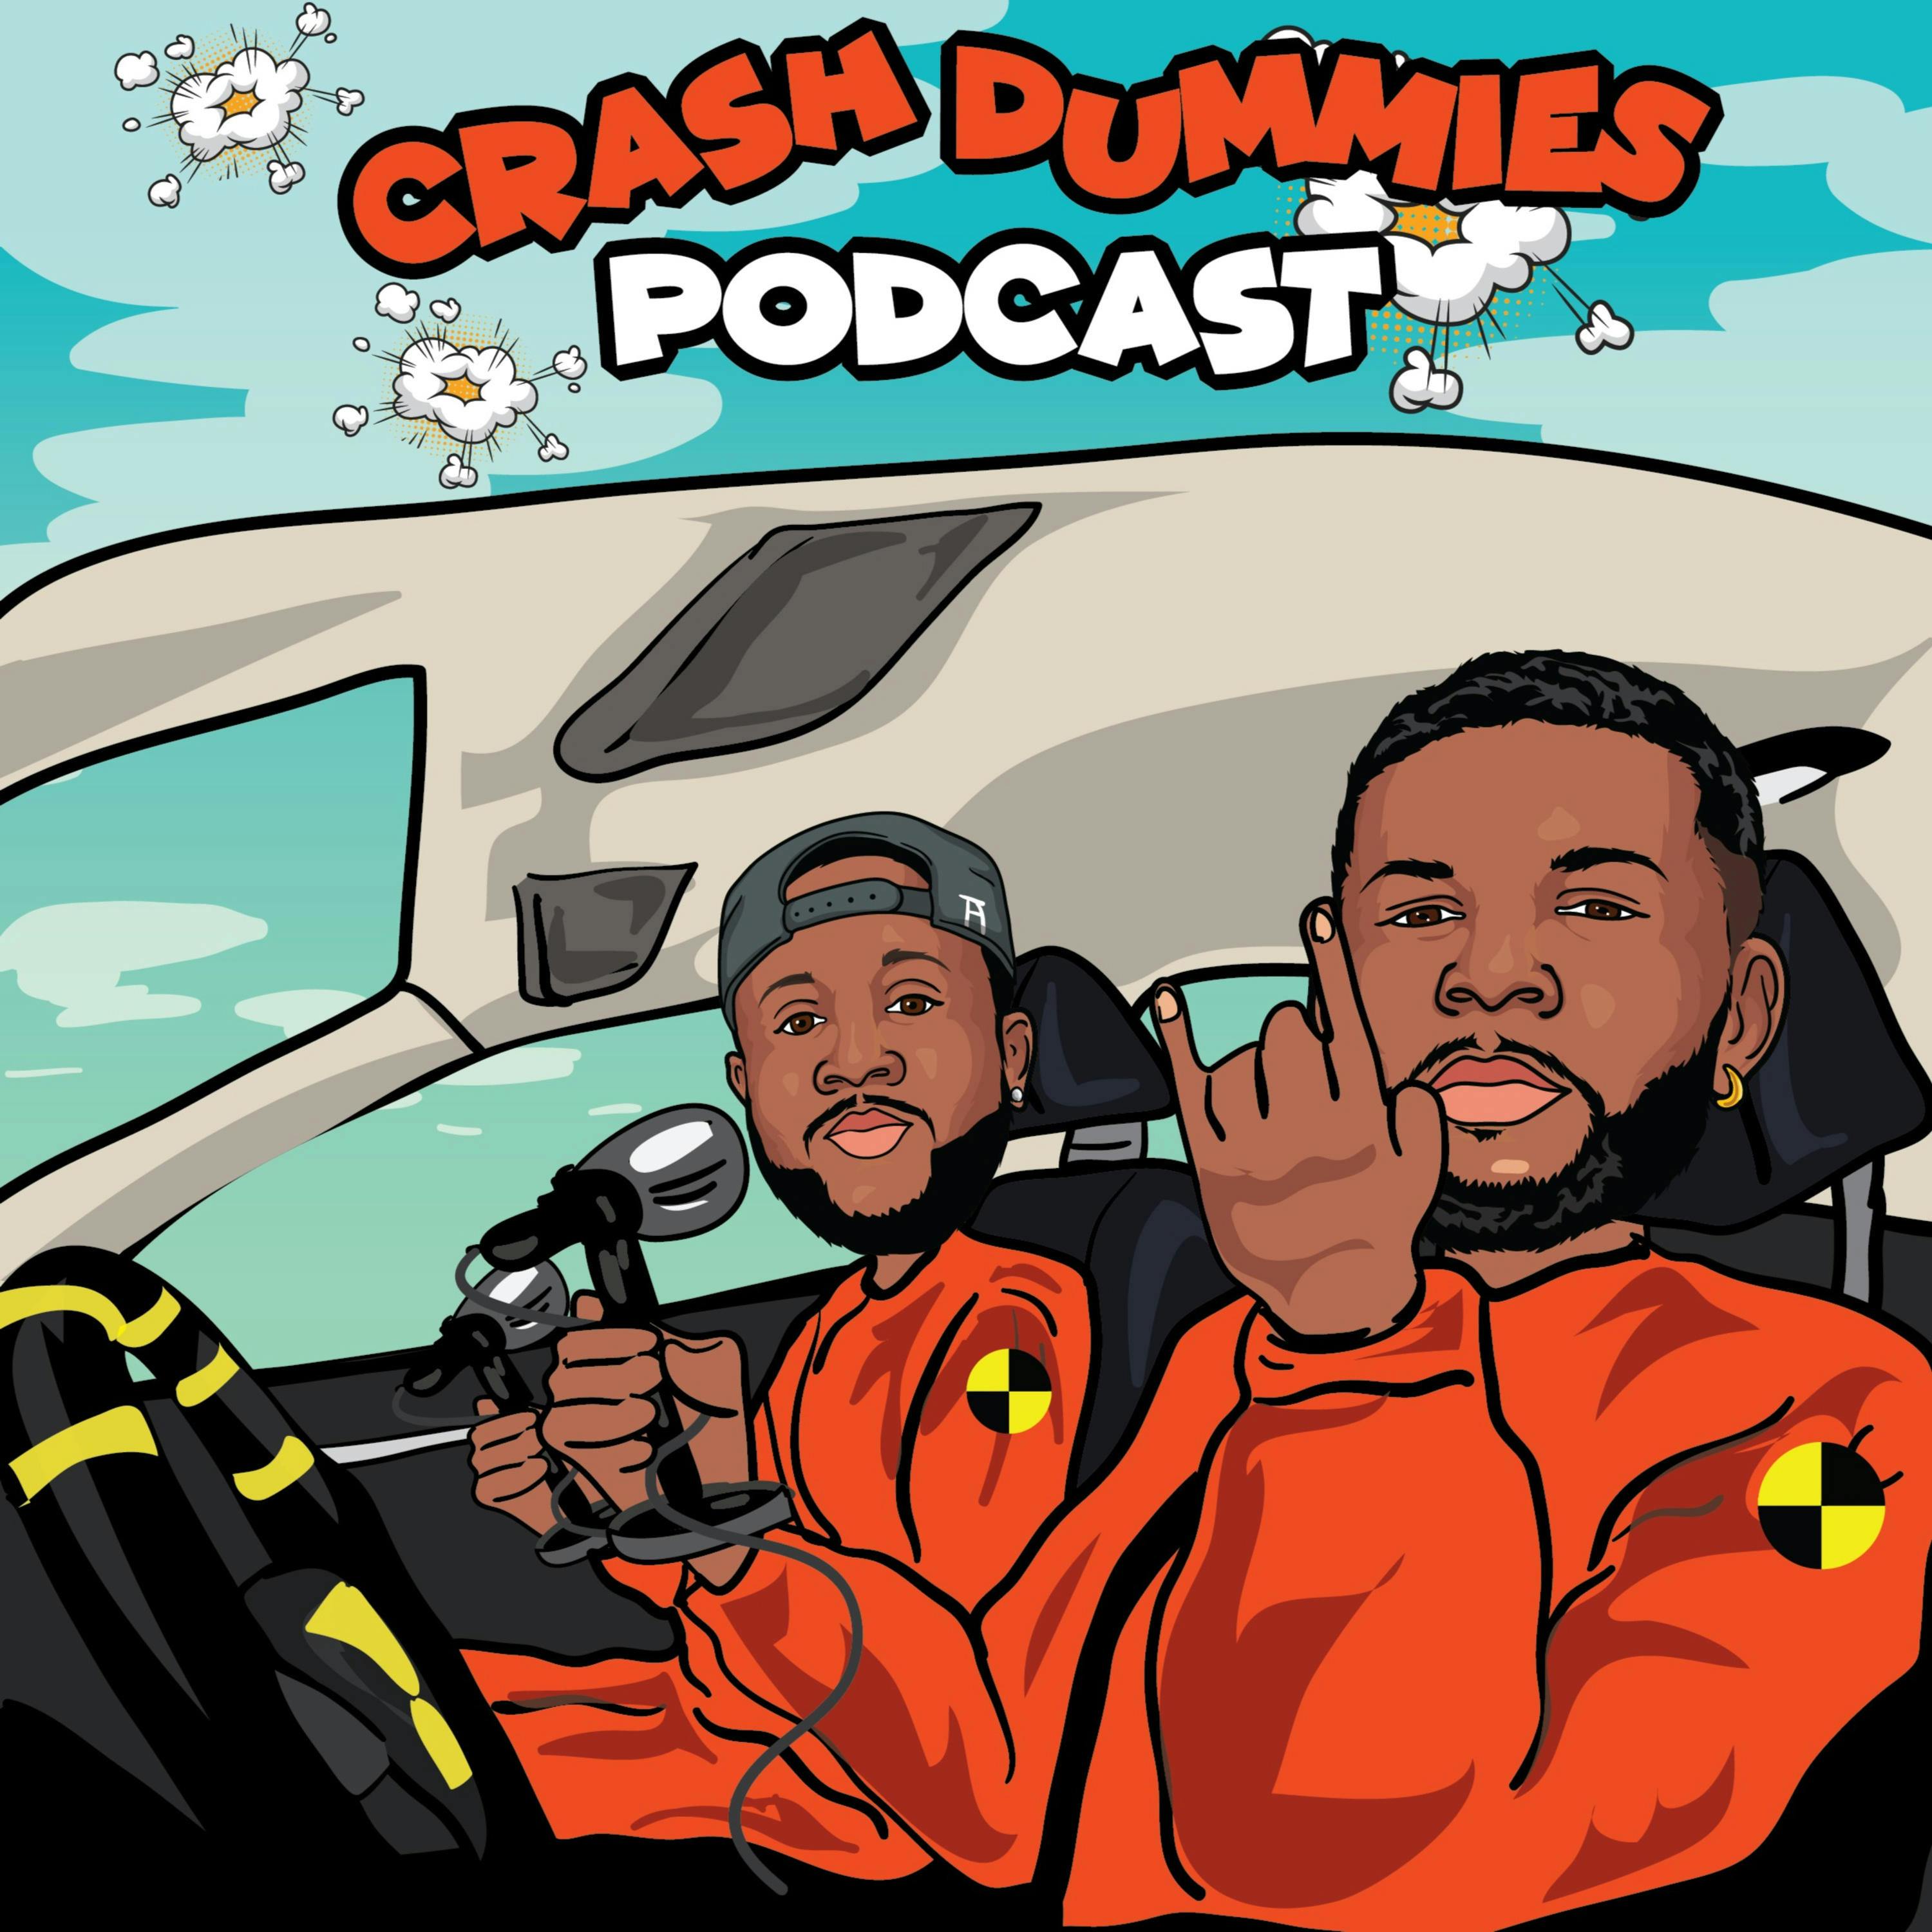 Crash Dummies Podcast with Pat and Mike:Crash Dummies Podcast